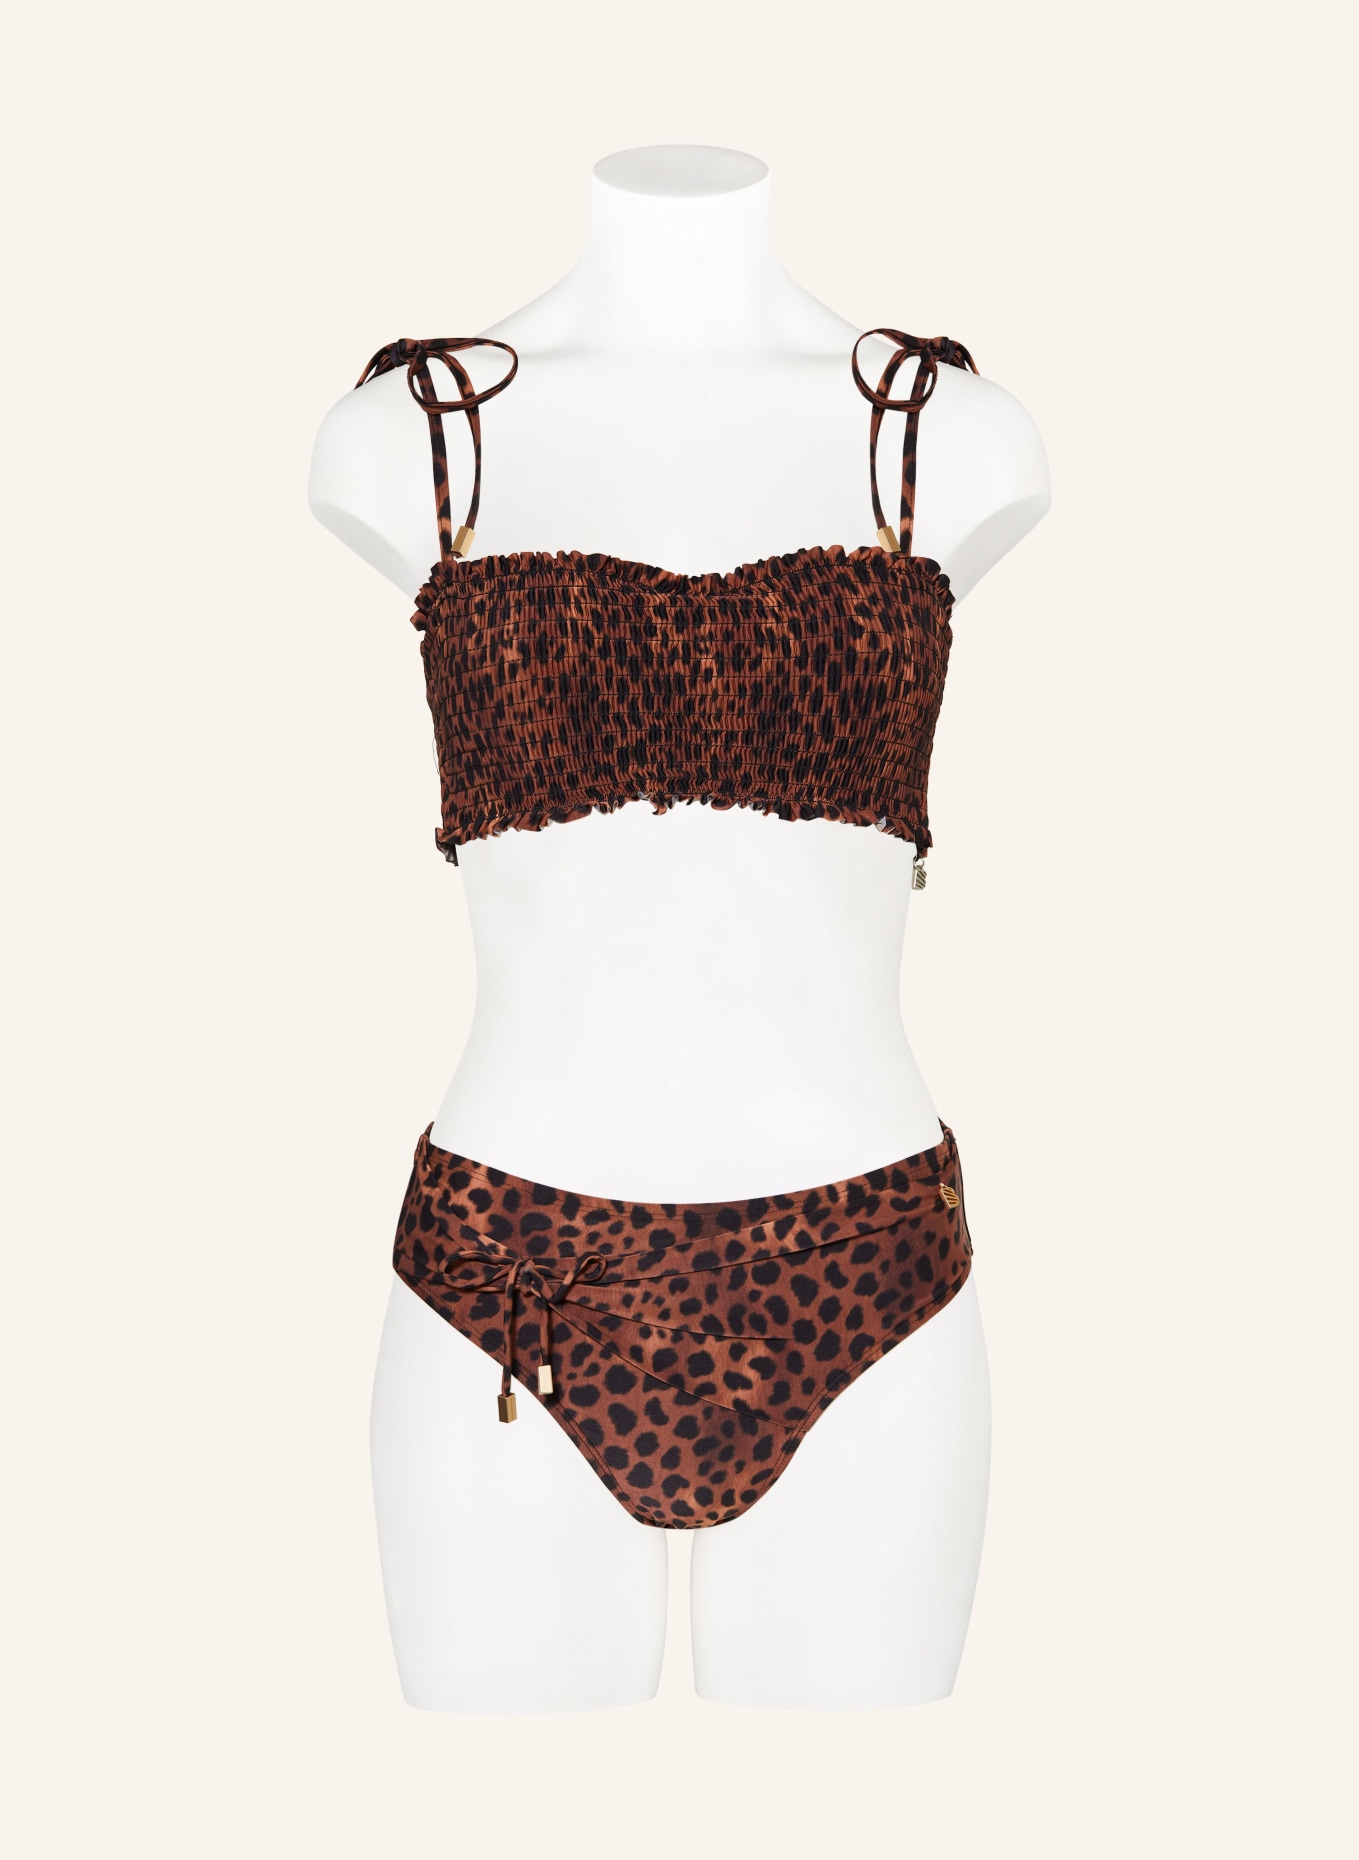 BEACHLIFE Underwired bikini top LEOPARD LOVER, Color: BLACK/ BROWN/ LIGHT BROWN (Image 2)